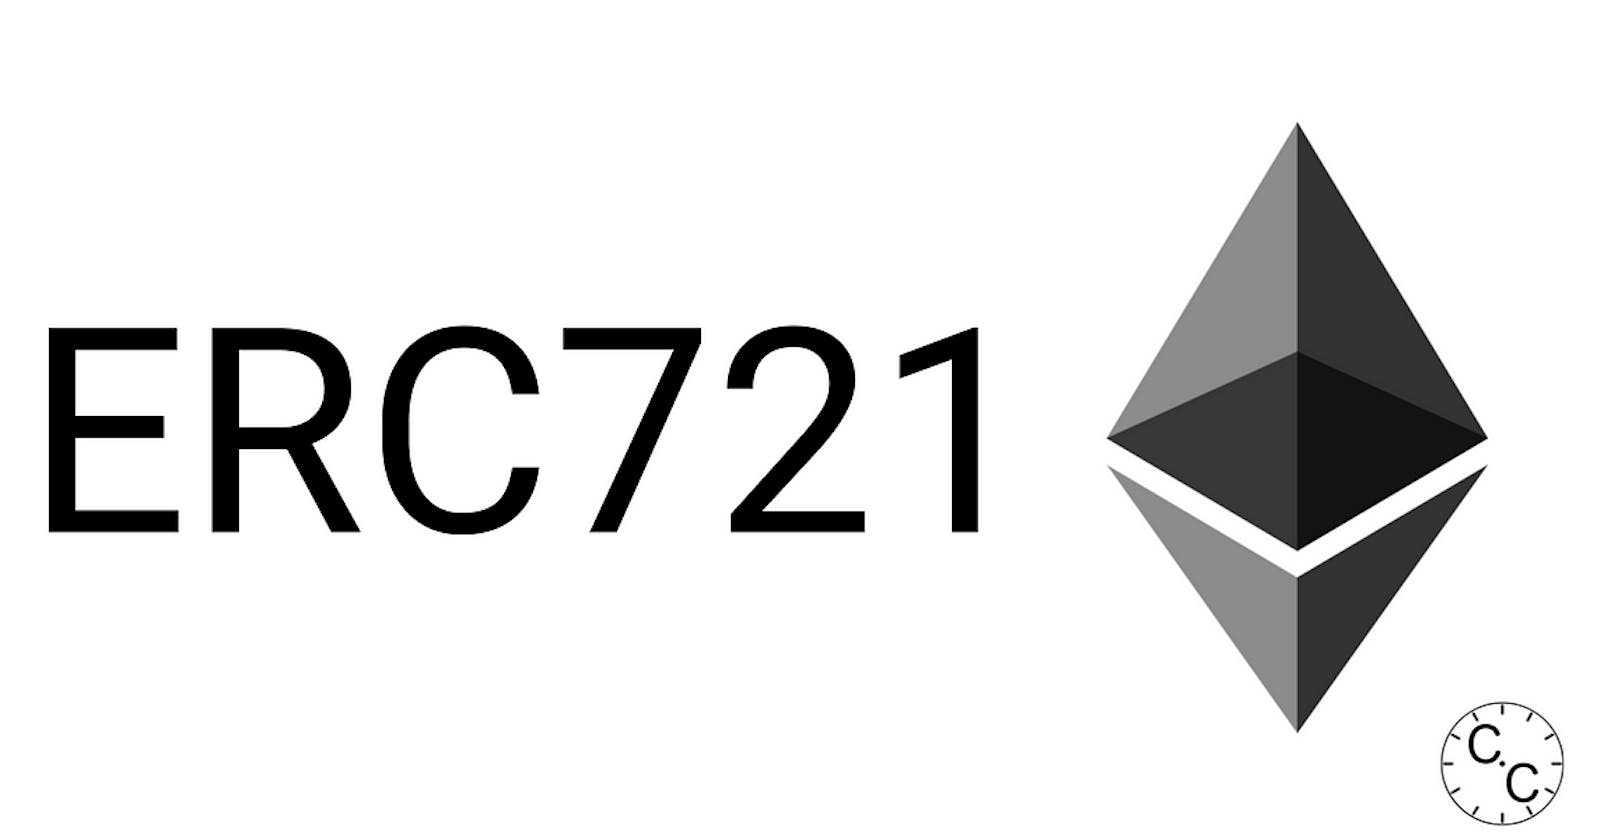 What is an ERC721 contract: I created my own ERC721 contract!